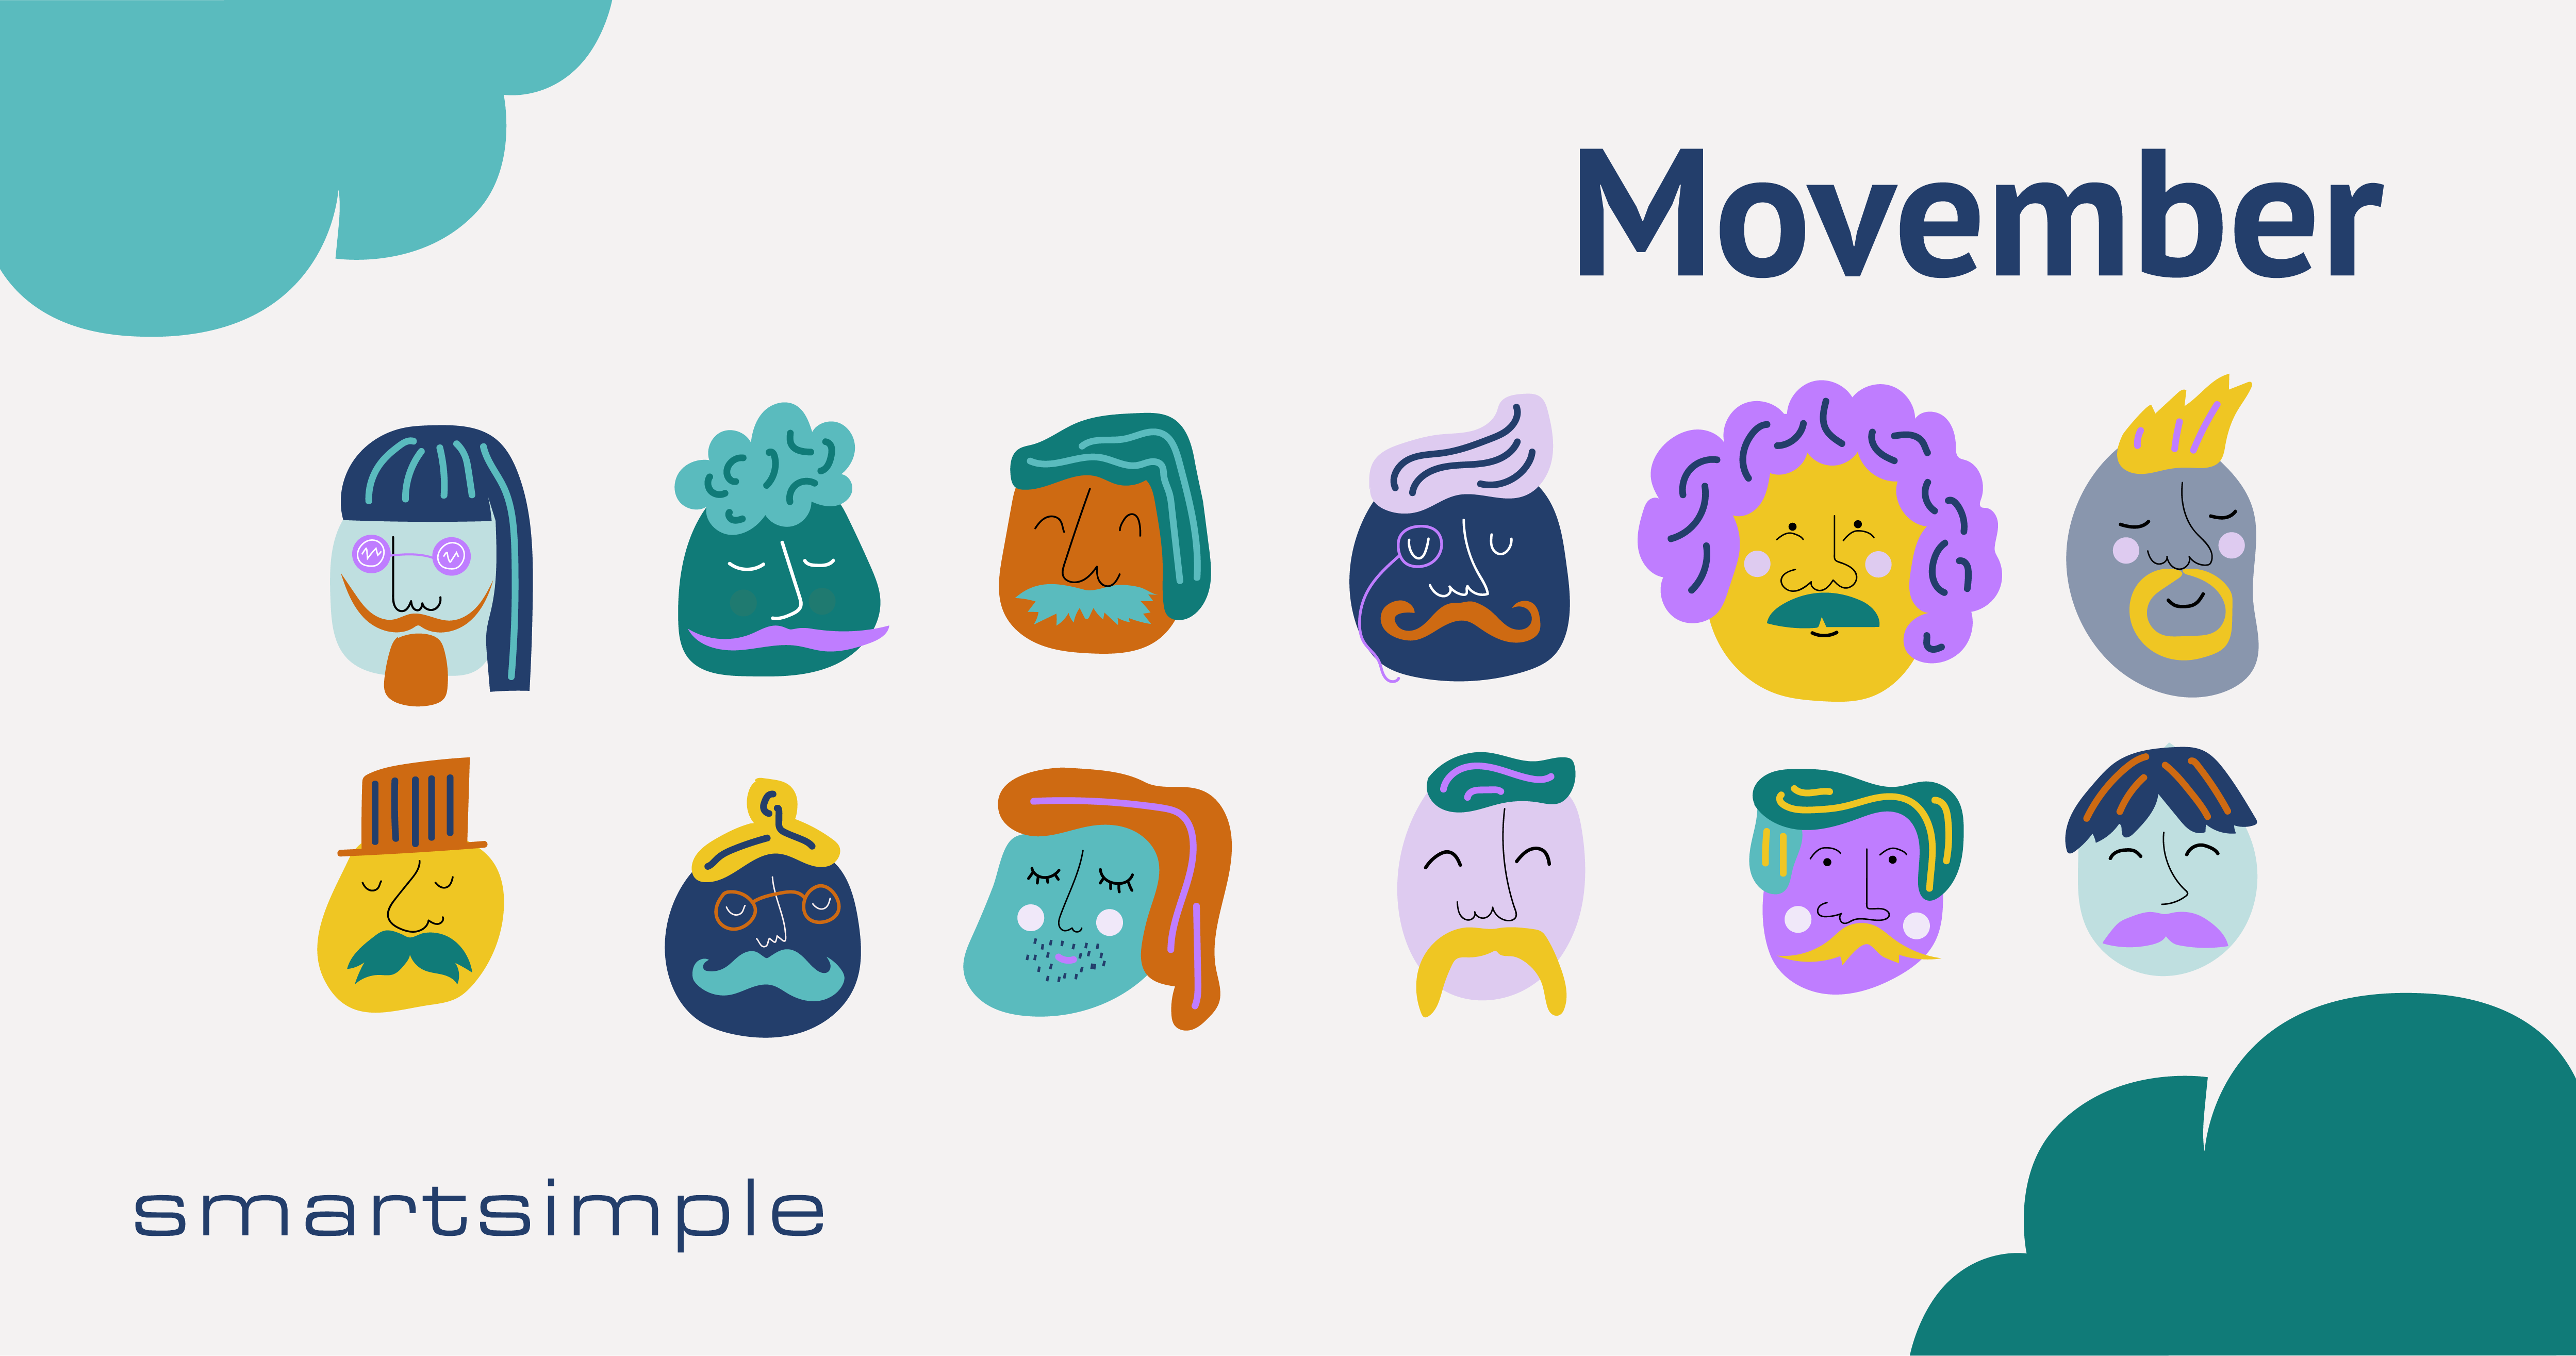 SmartSimple Celebrates Movember for Awareness of Men’s Health Issues